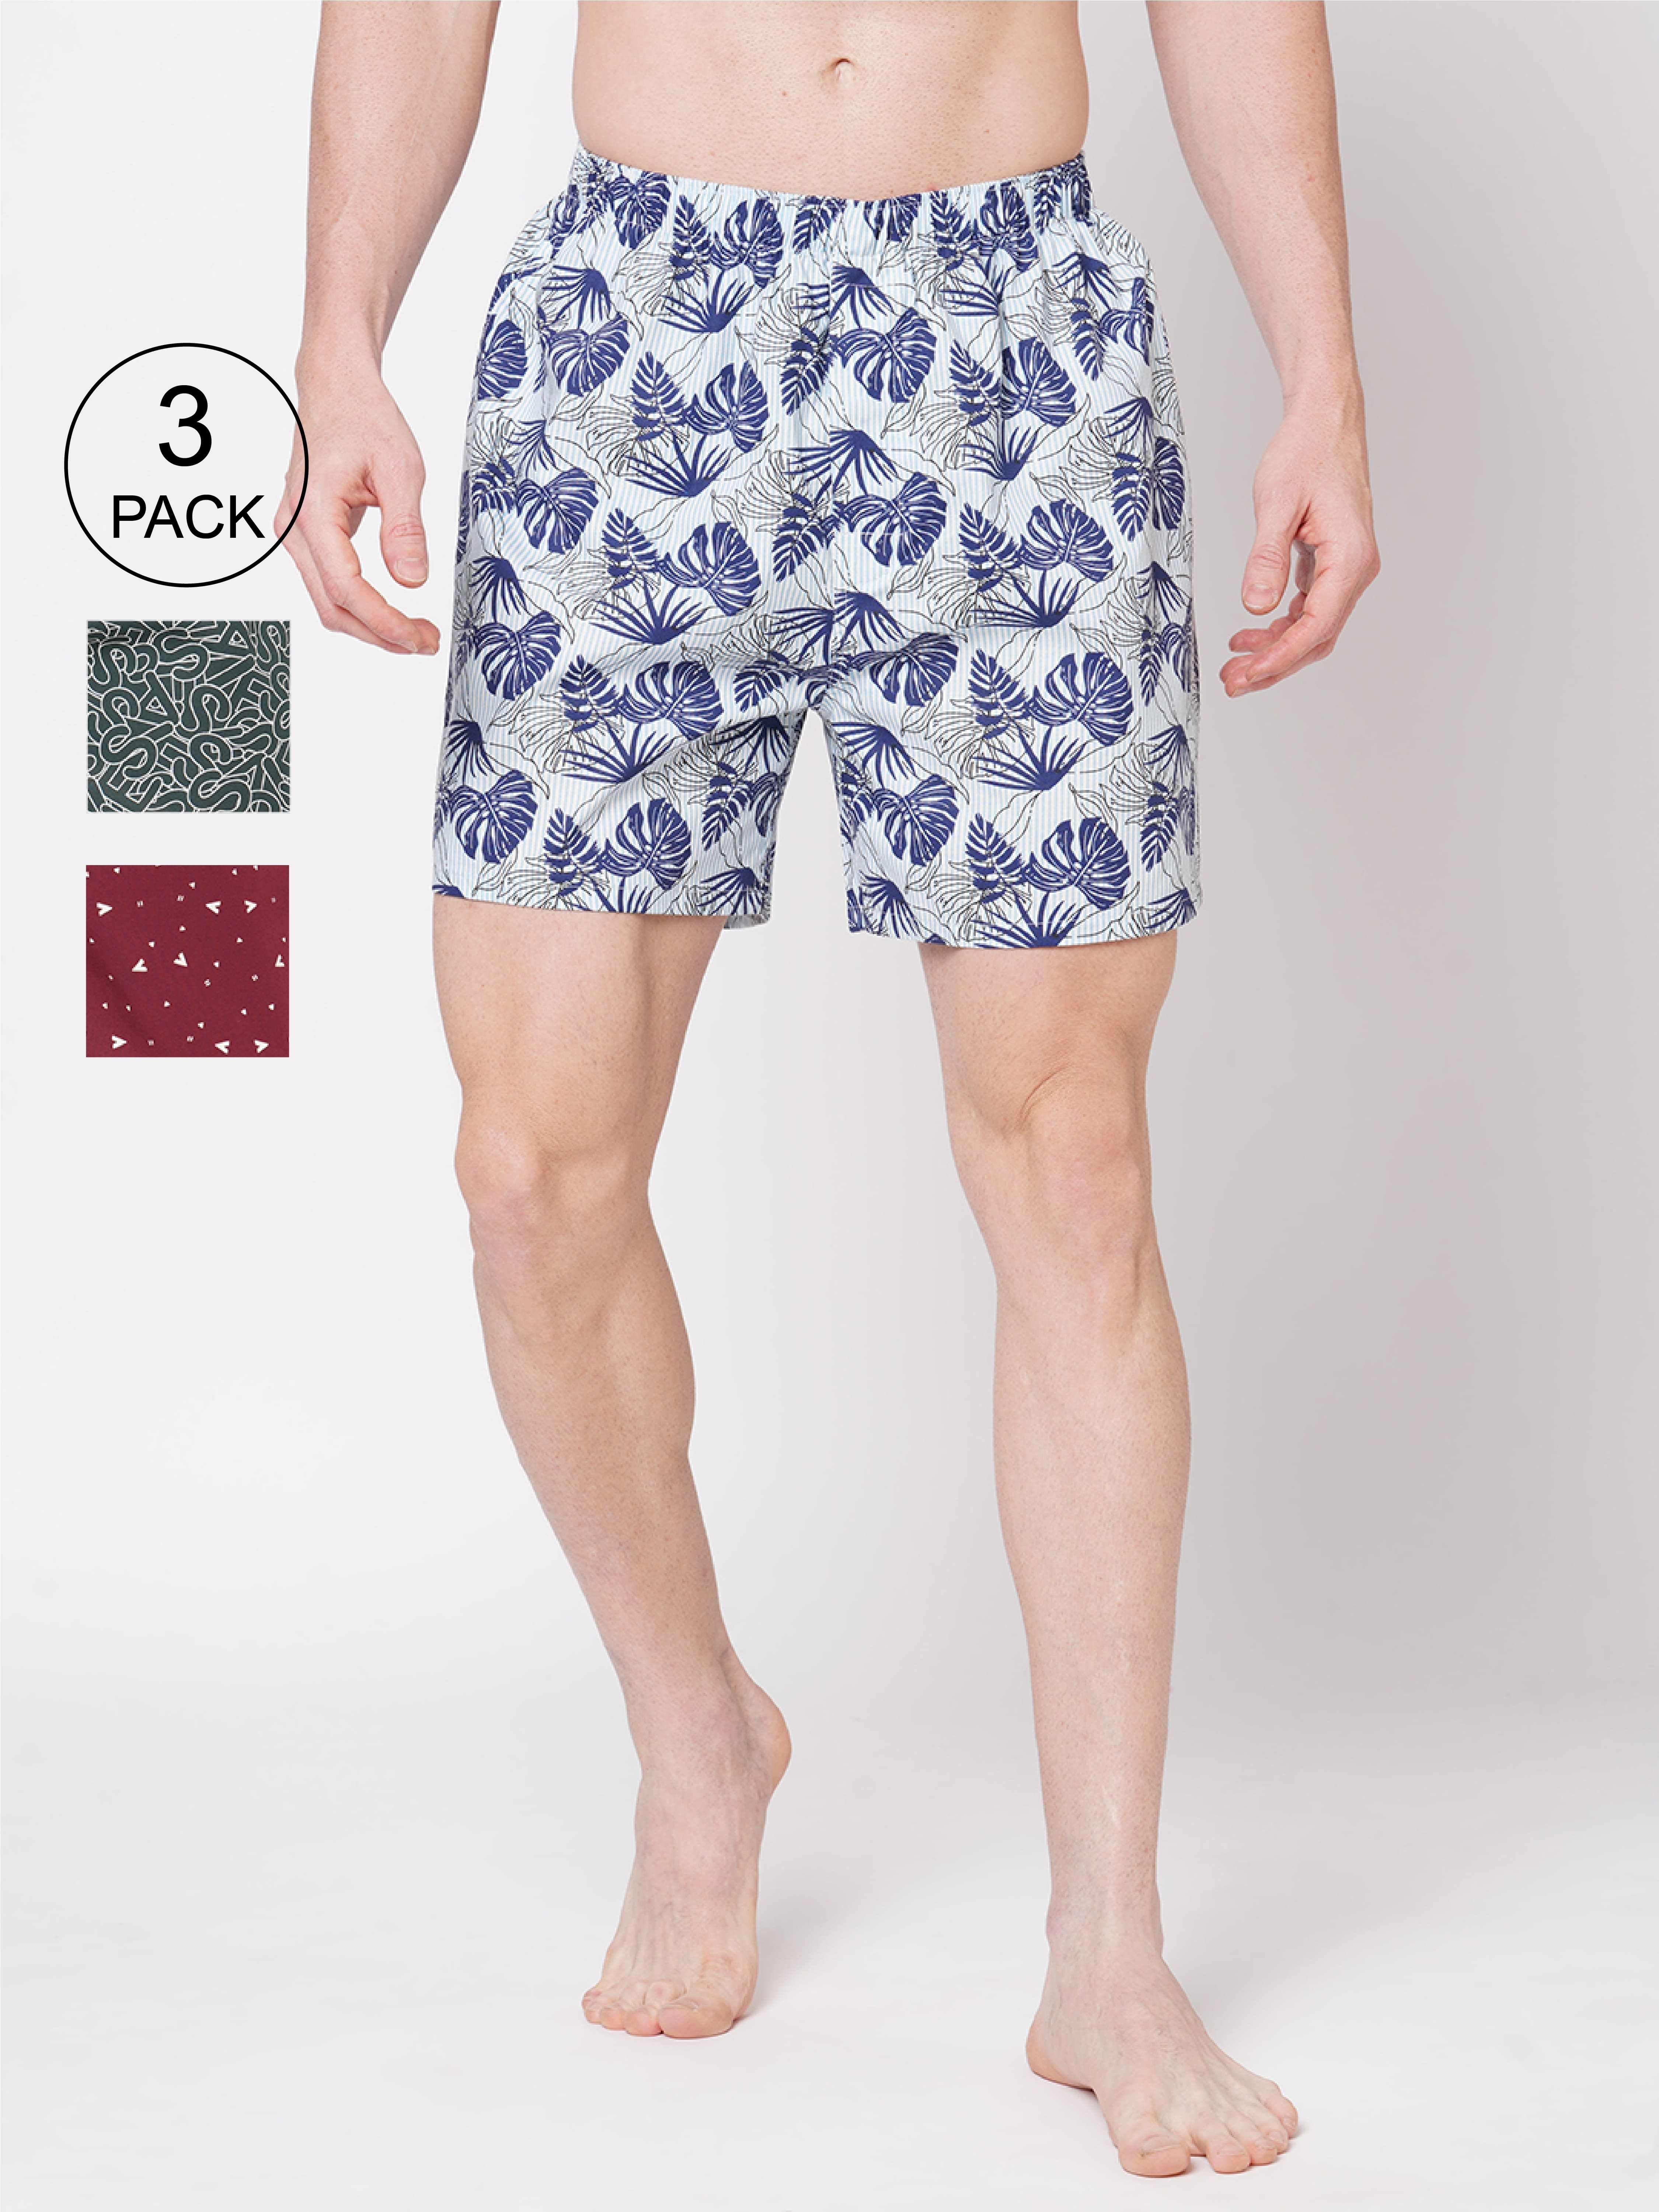 Fitz 100% Pure Cotton Printed Regular Fit Boxer Shorts For Mens - Pack of 3